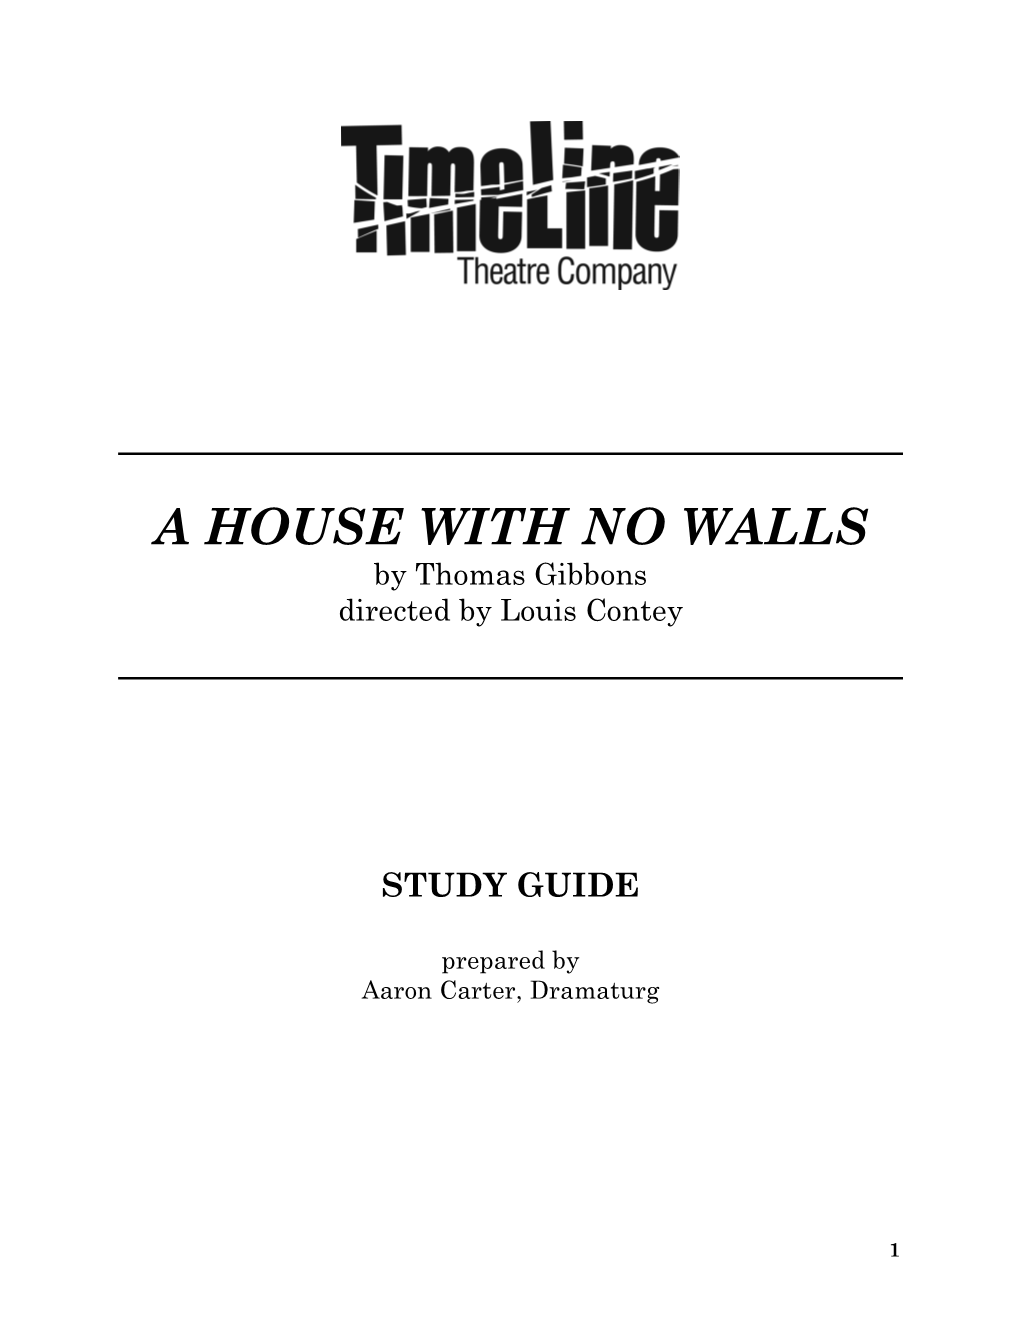 A HOUSE with NO WALLS by Thomas Gibbons Directed by Louis Contey